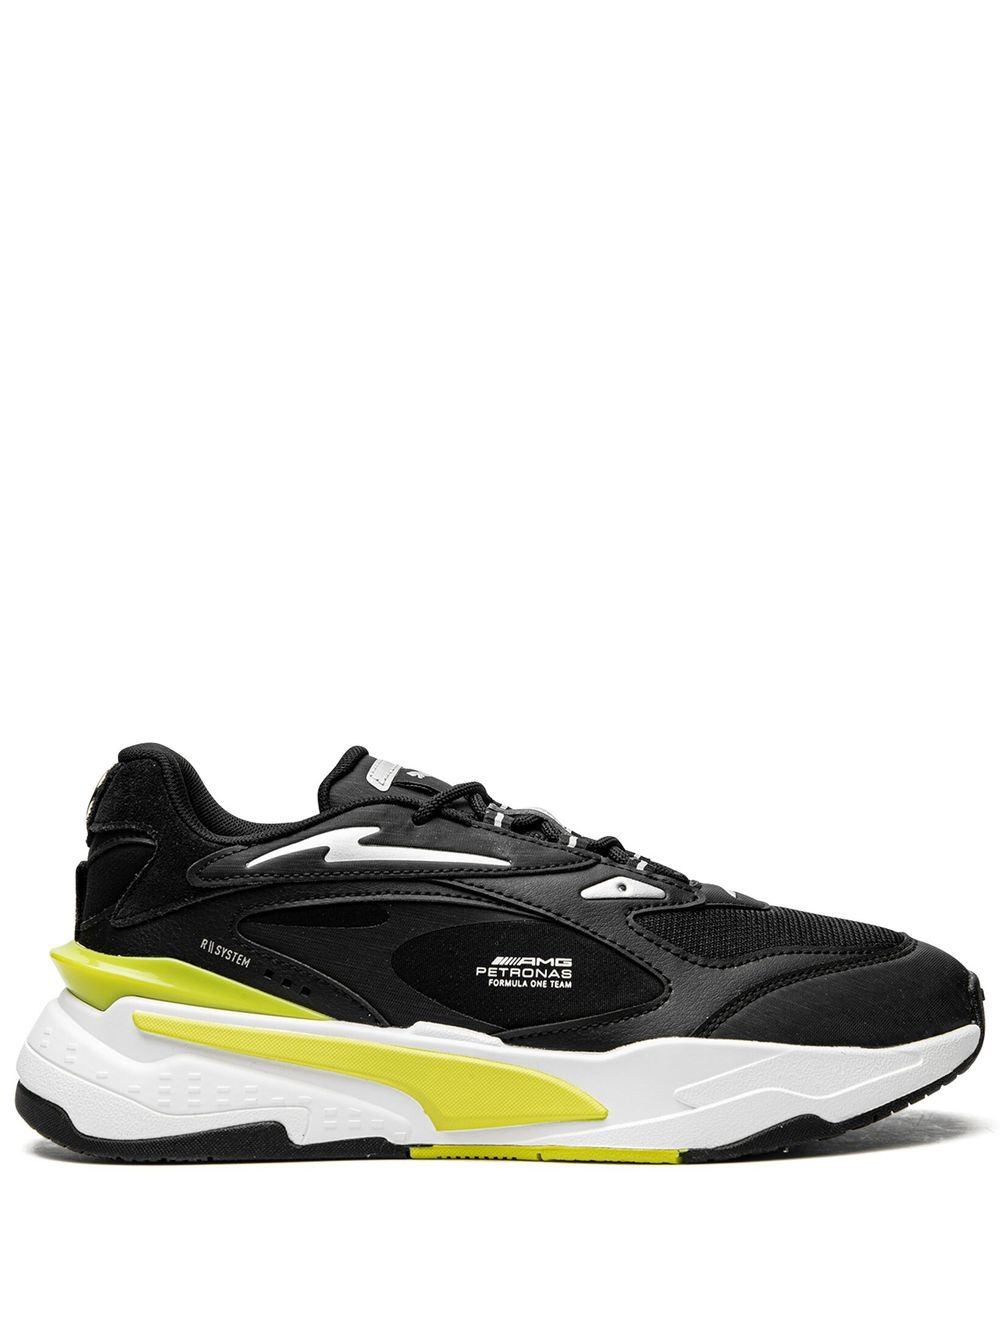 Puma Mapf1 Rs-fast Low-top Sneakers In Black